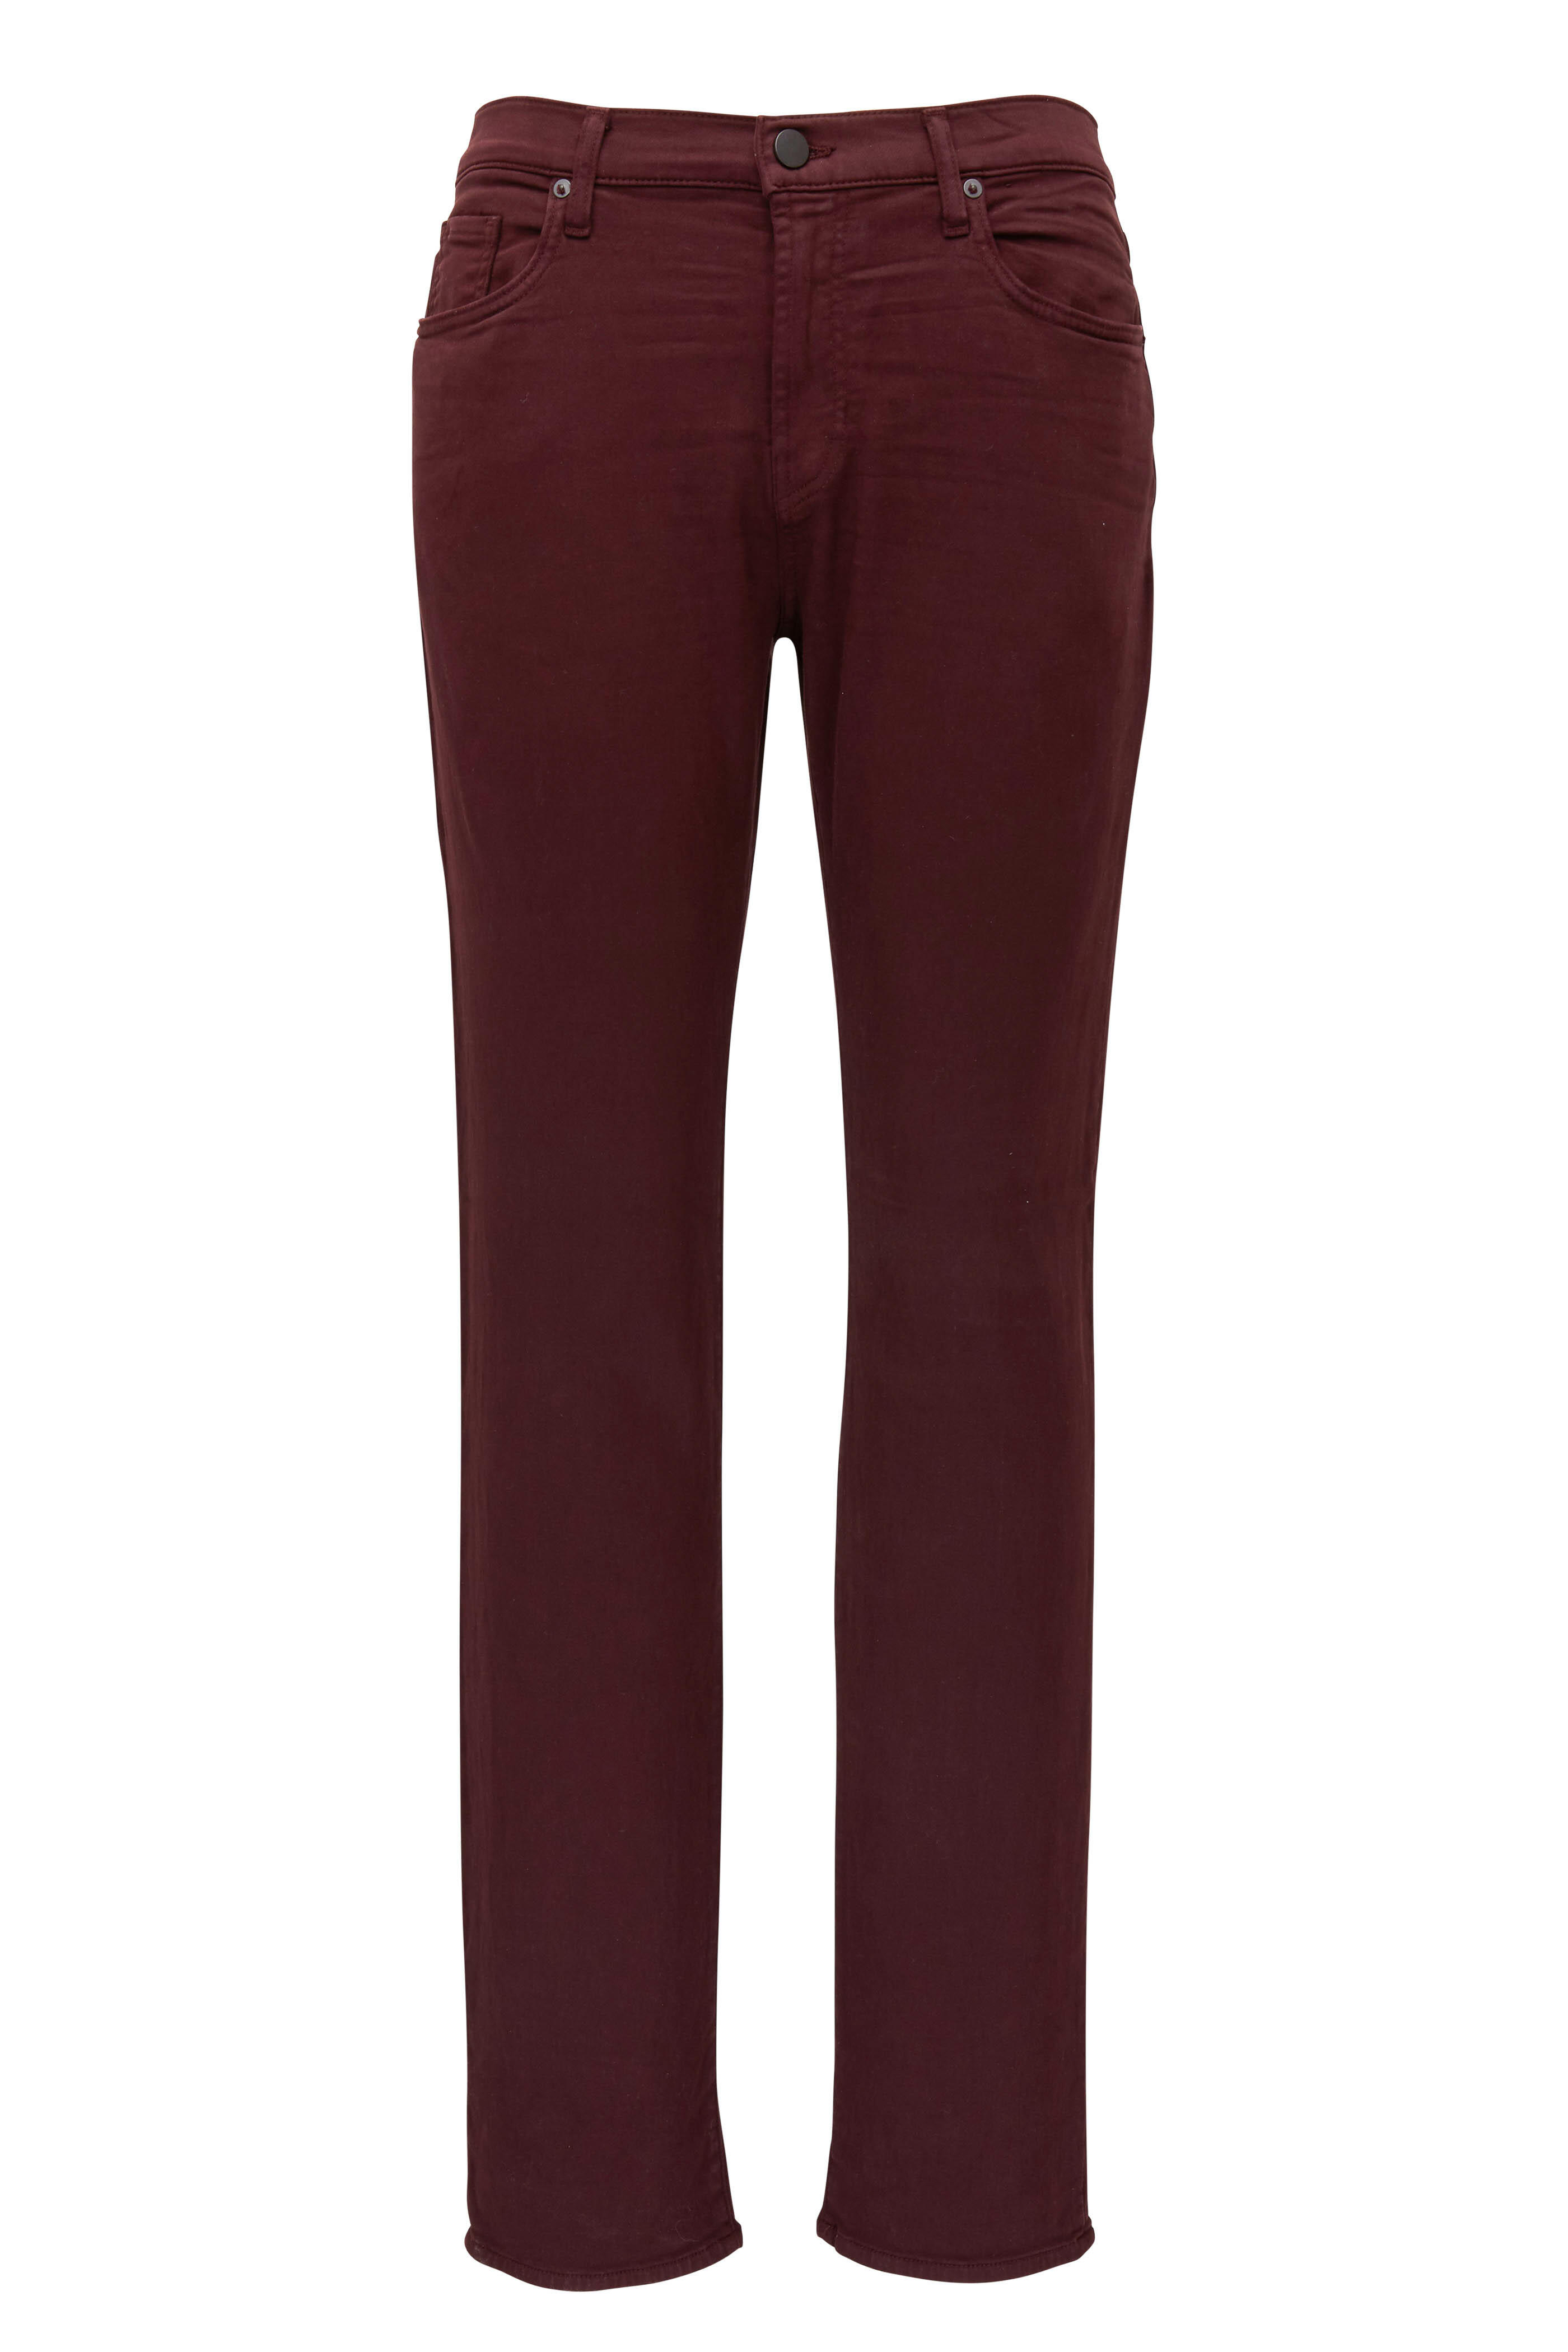 J Brand - Kane Plum French Terry Straight Fit Jean